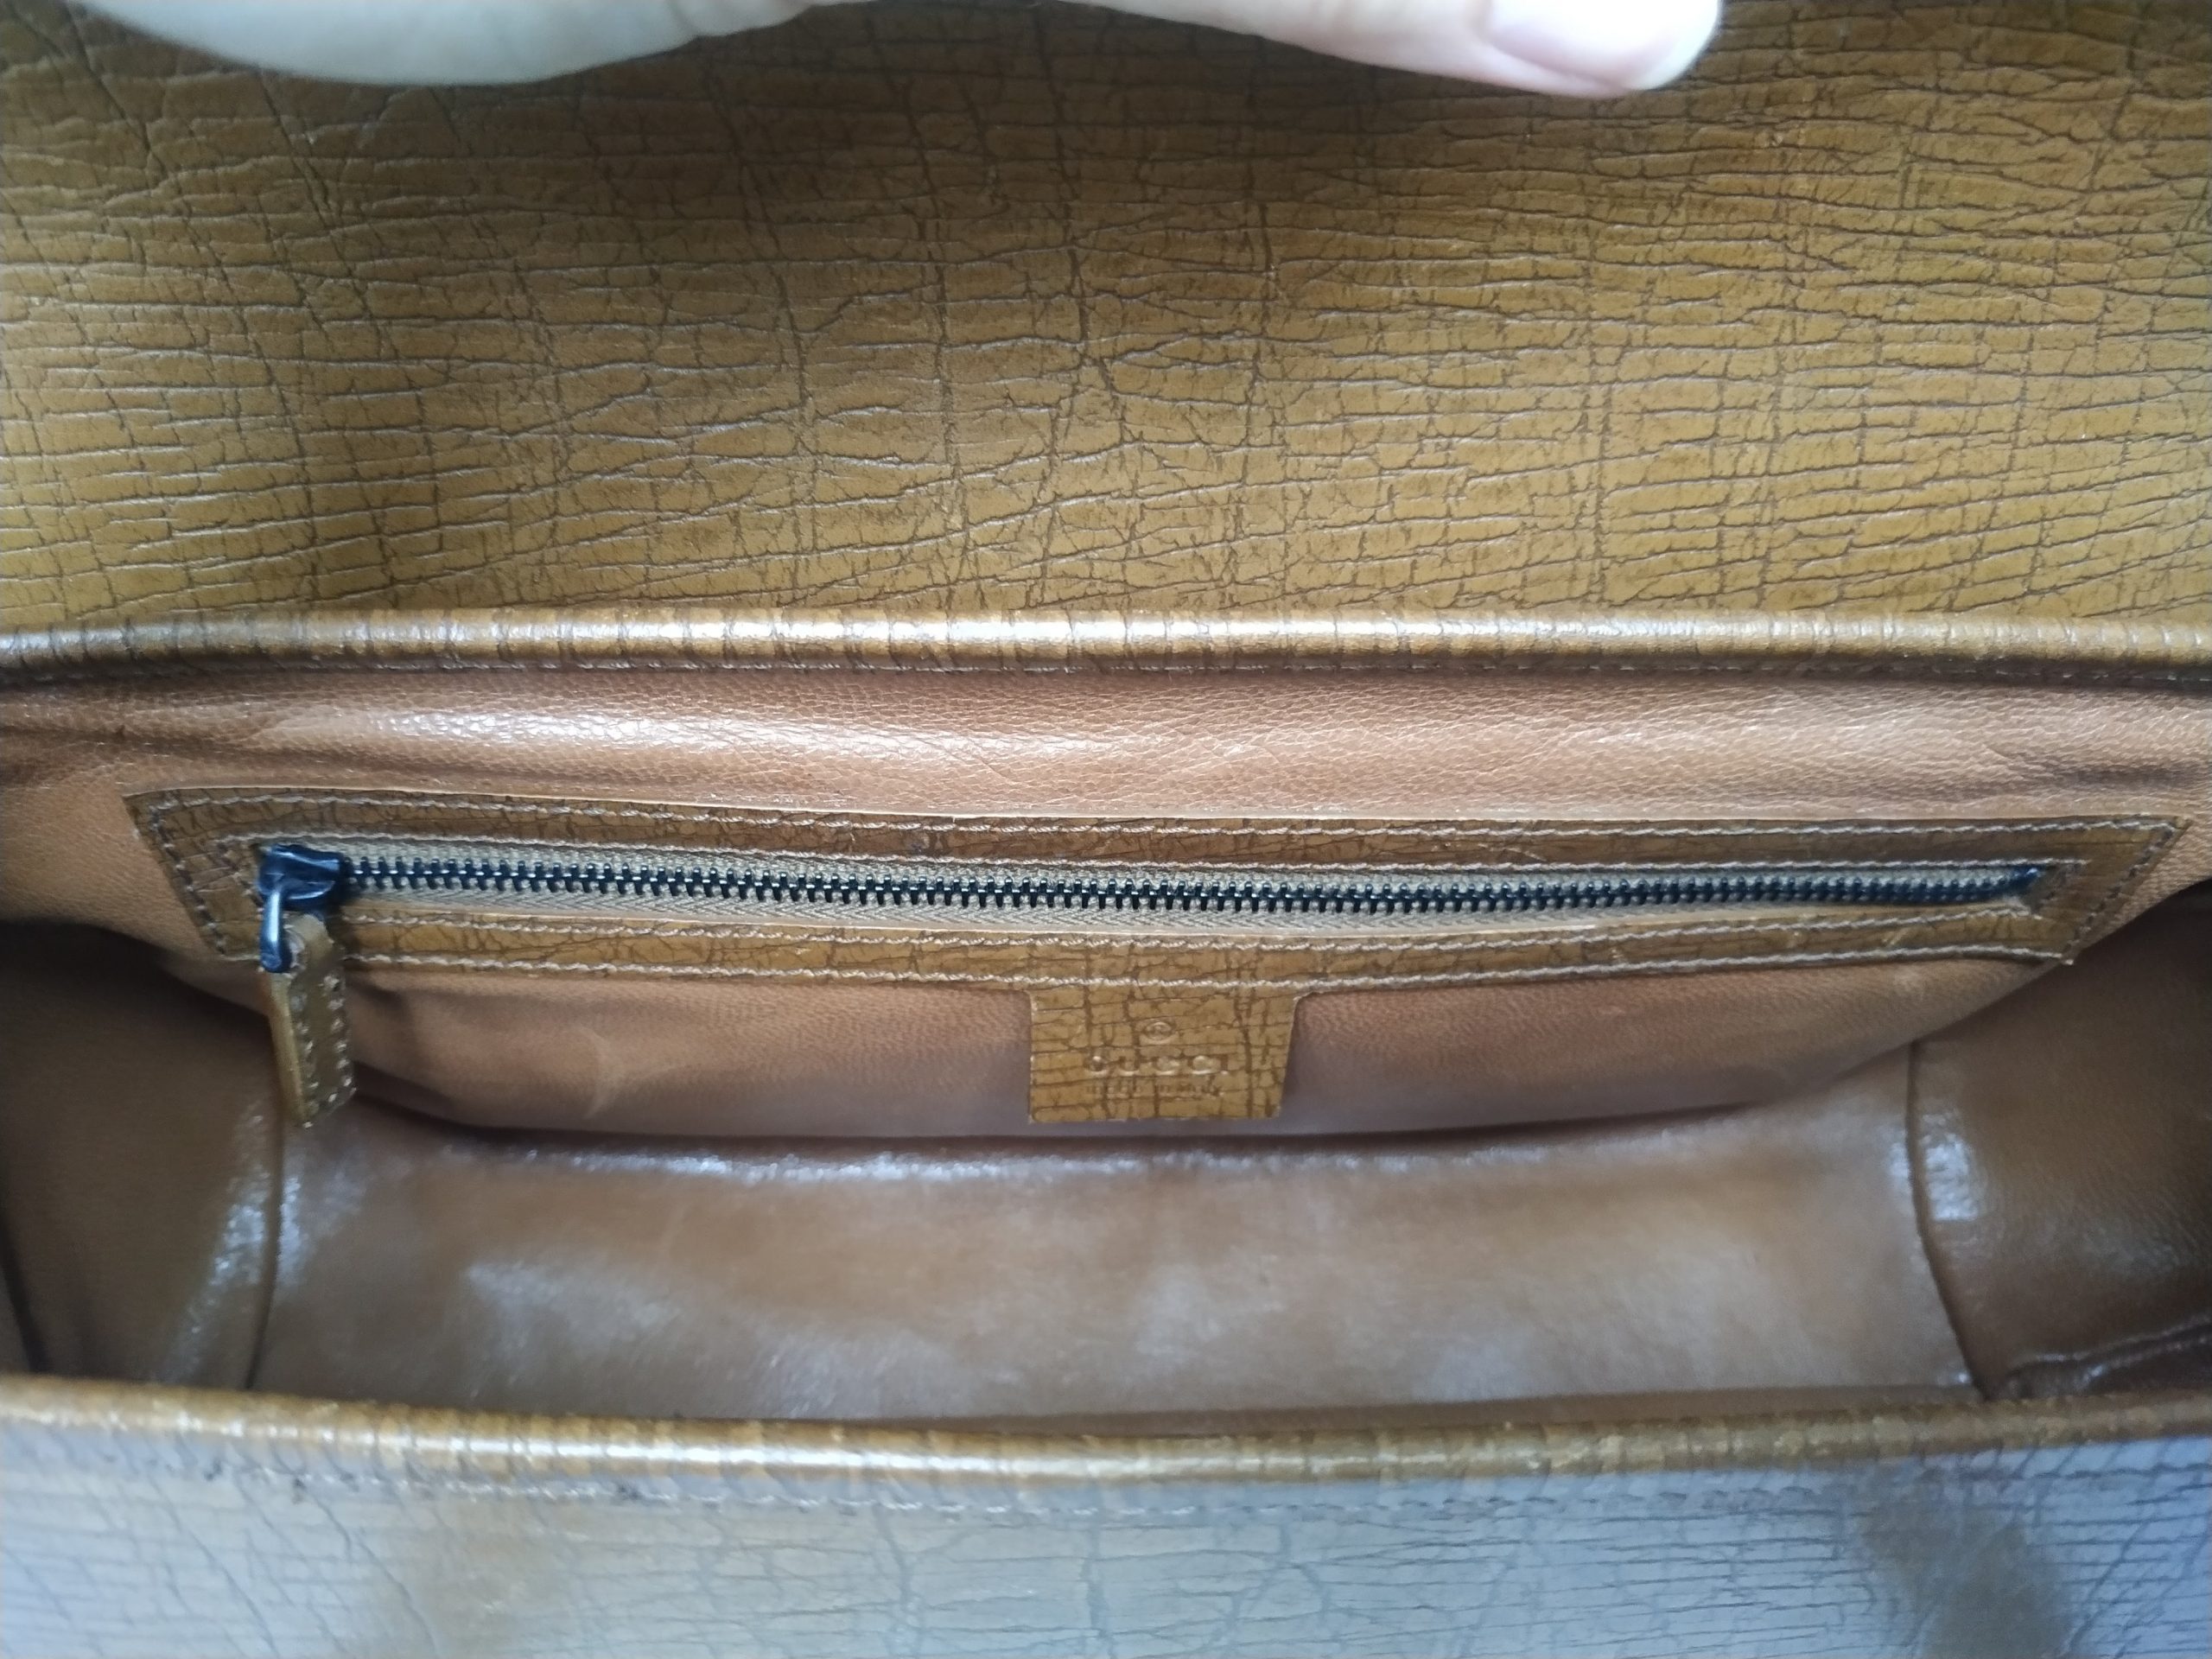 Gucci Bamboo Bullet Tom Ford Bag - Earth Luxury